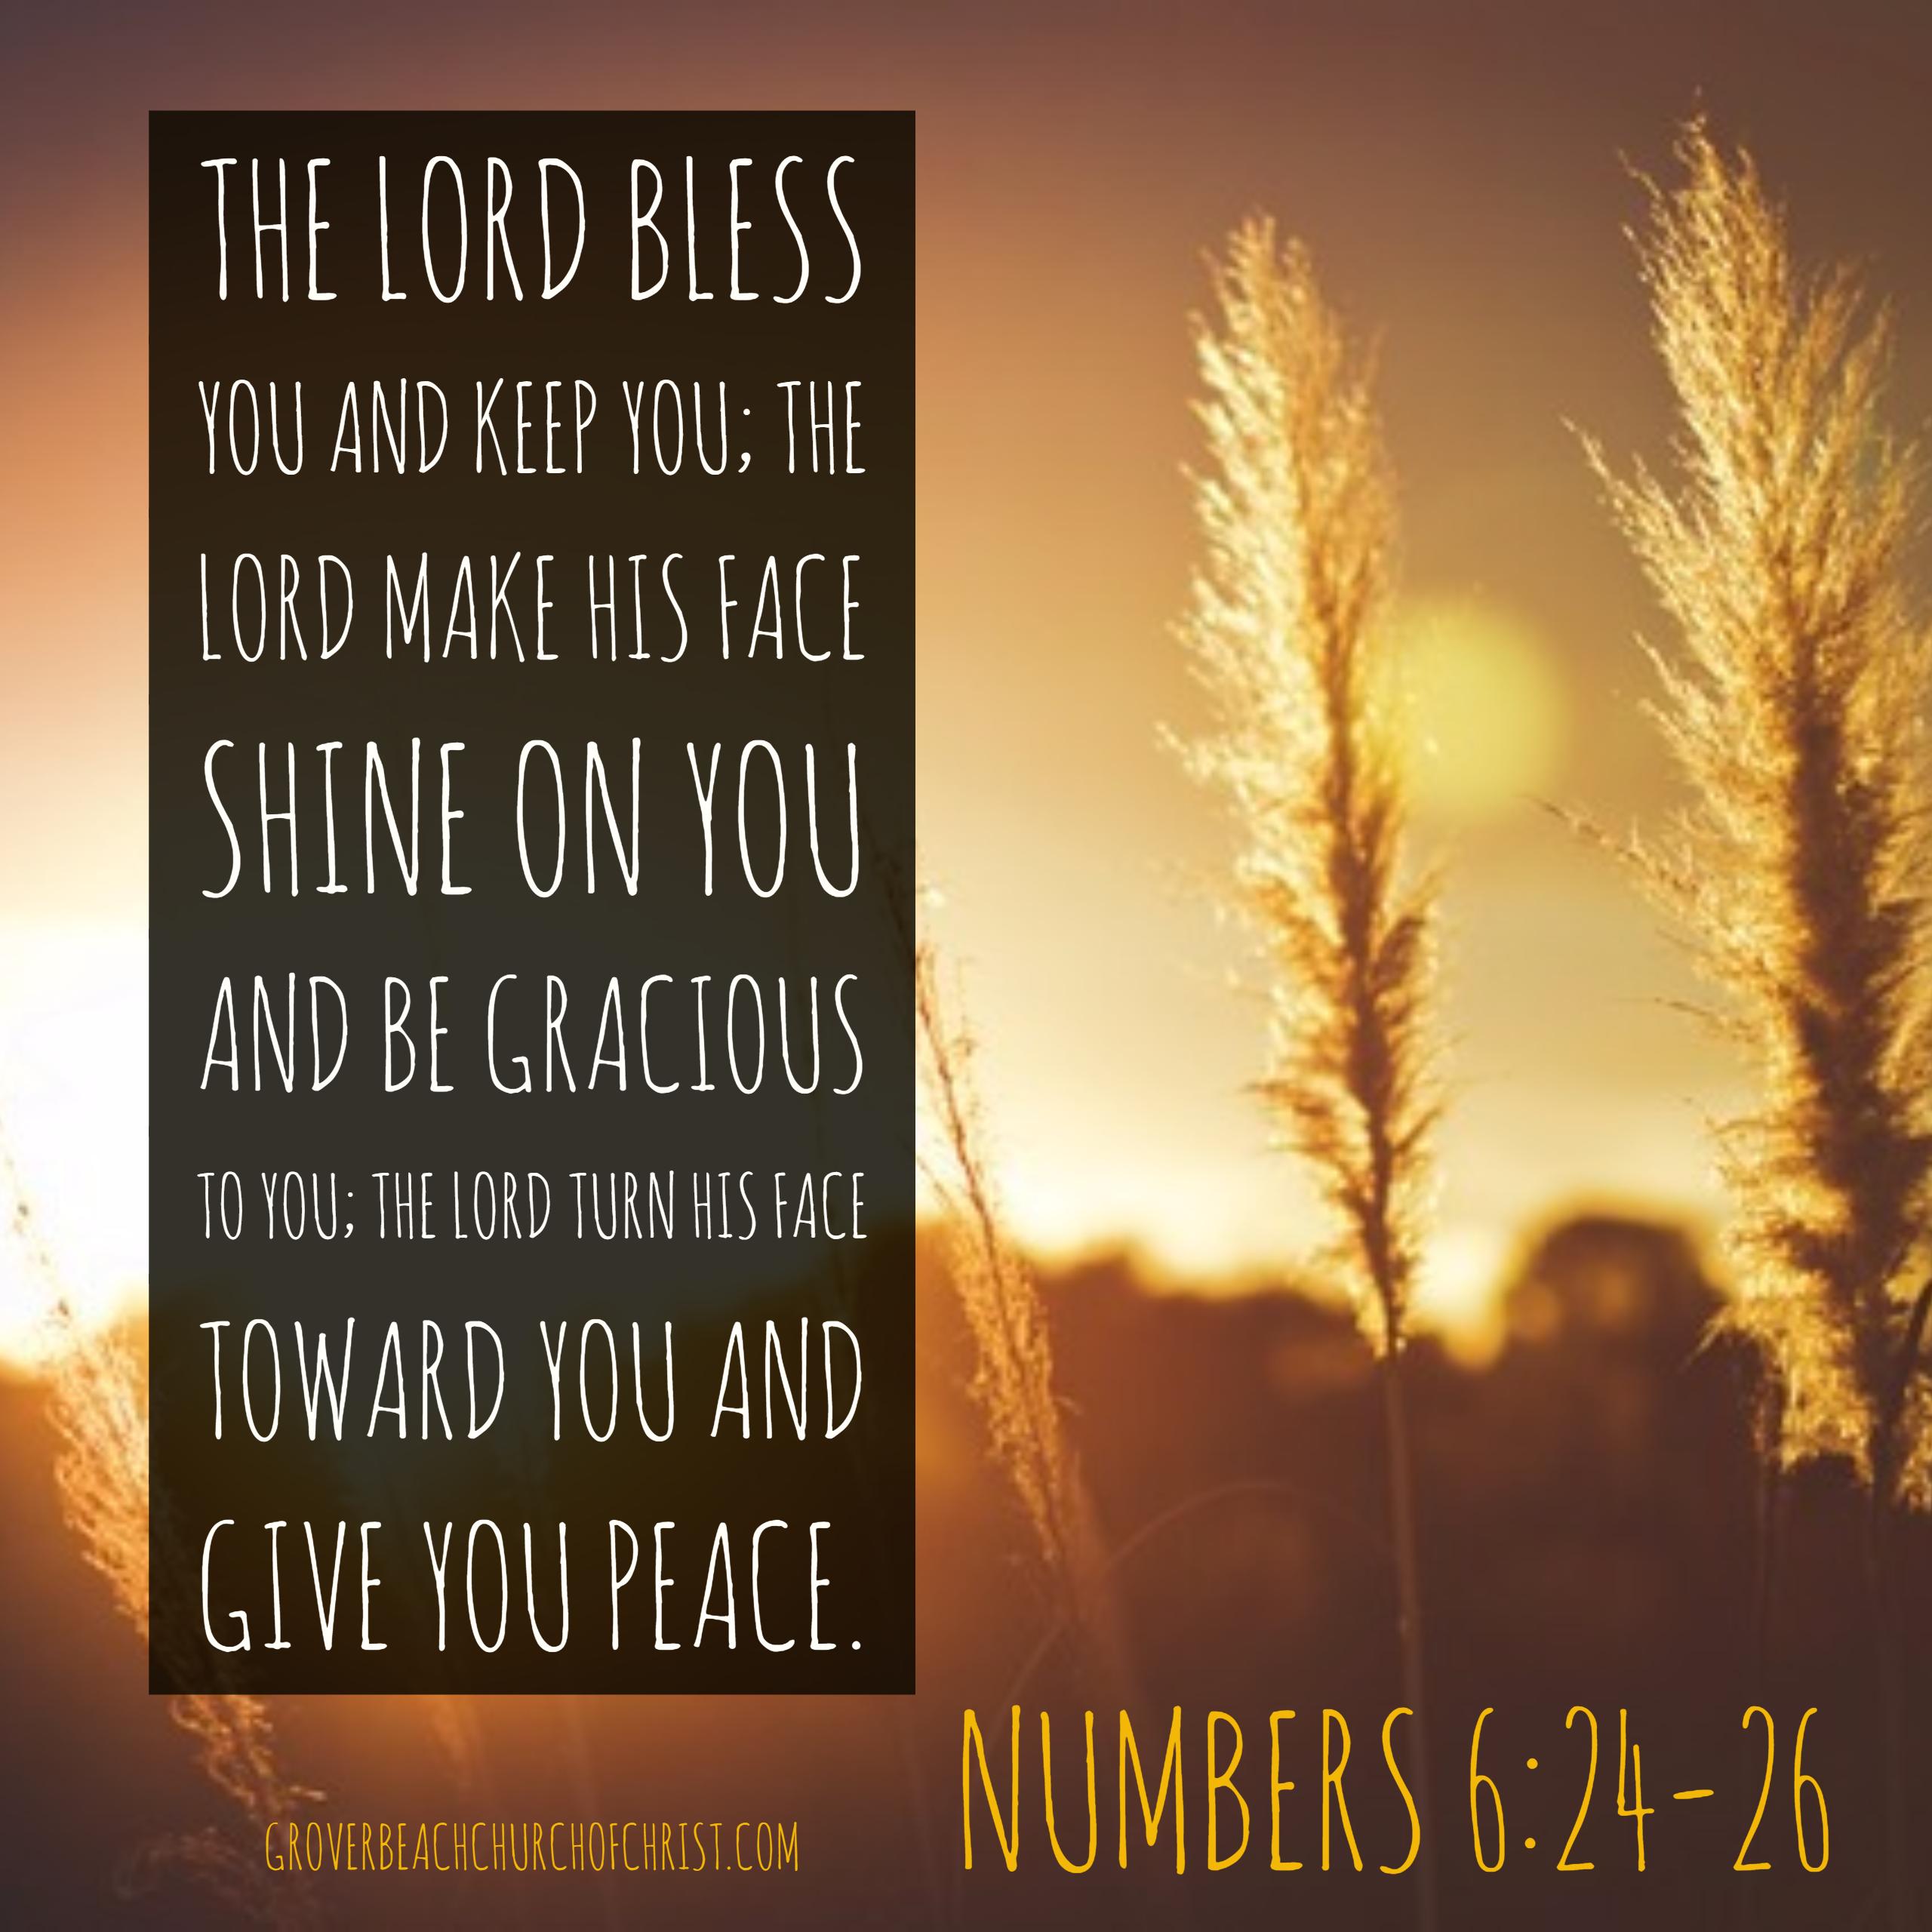 Numbers 6-24, 26 The lord bless you